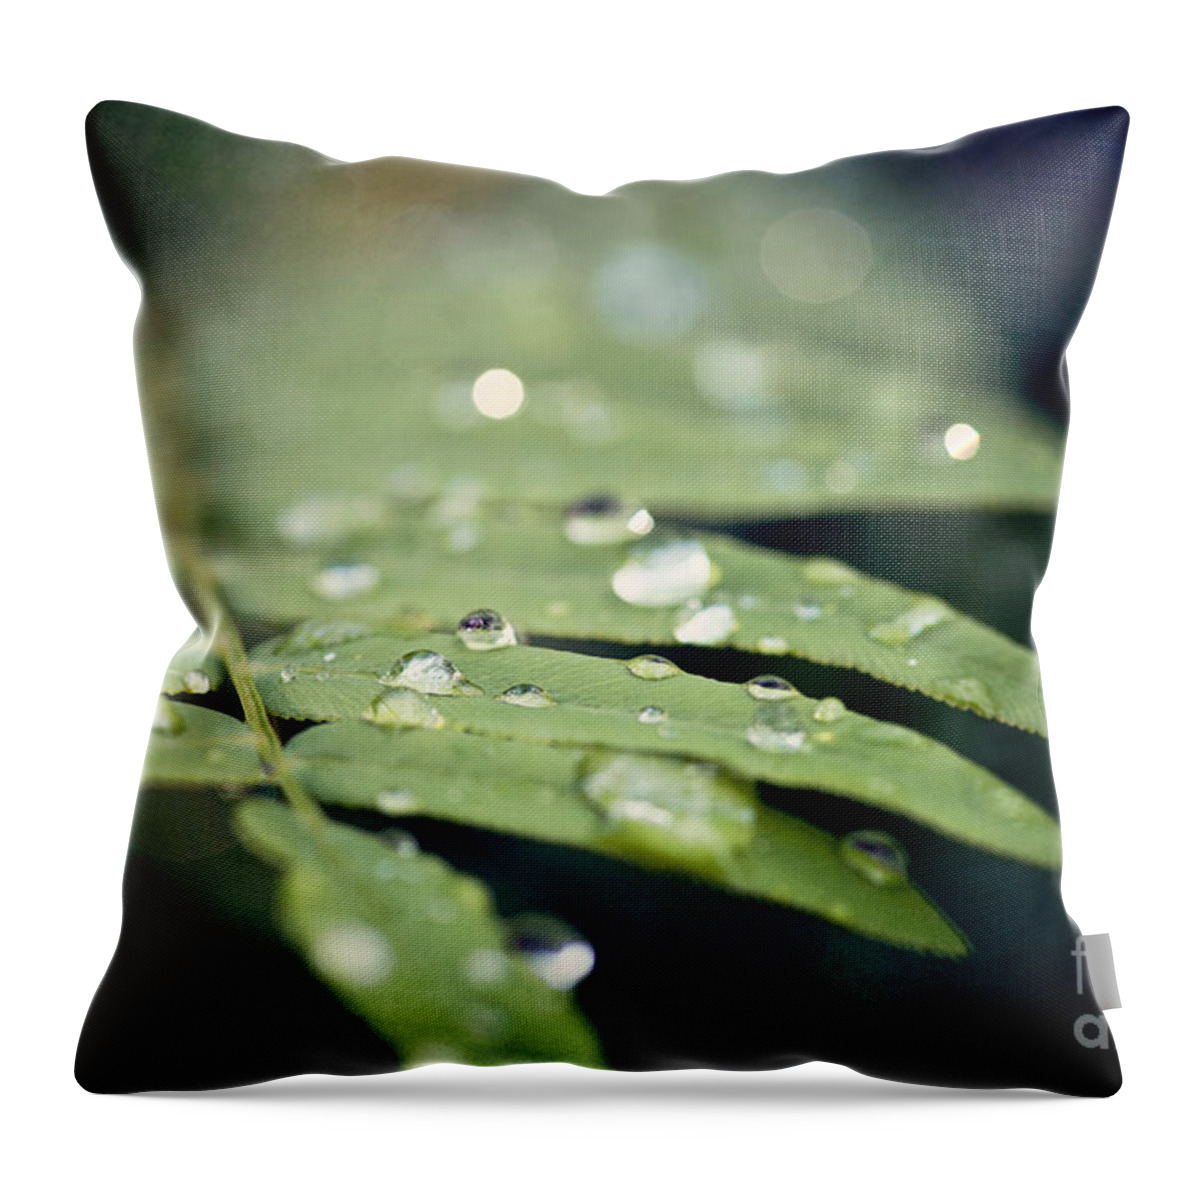 Green Throw Pillow featuring the photograph The Fern by Erin Johnson